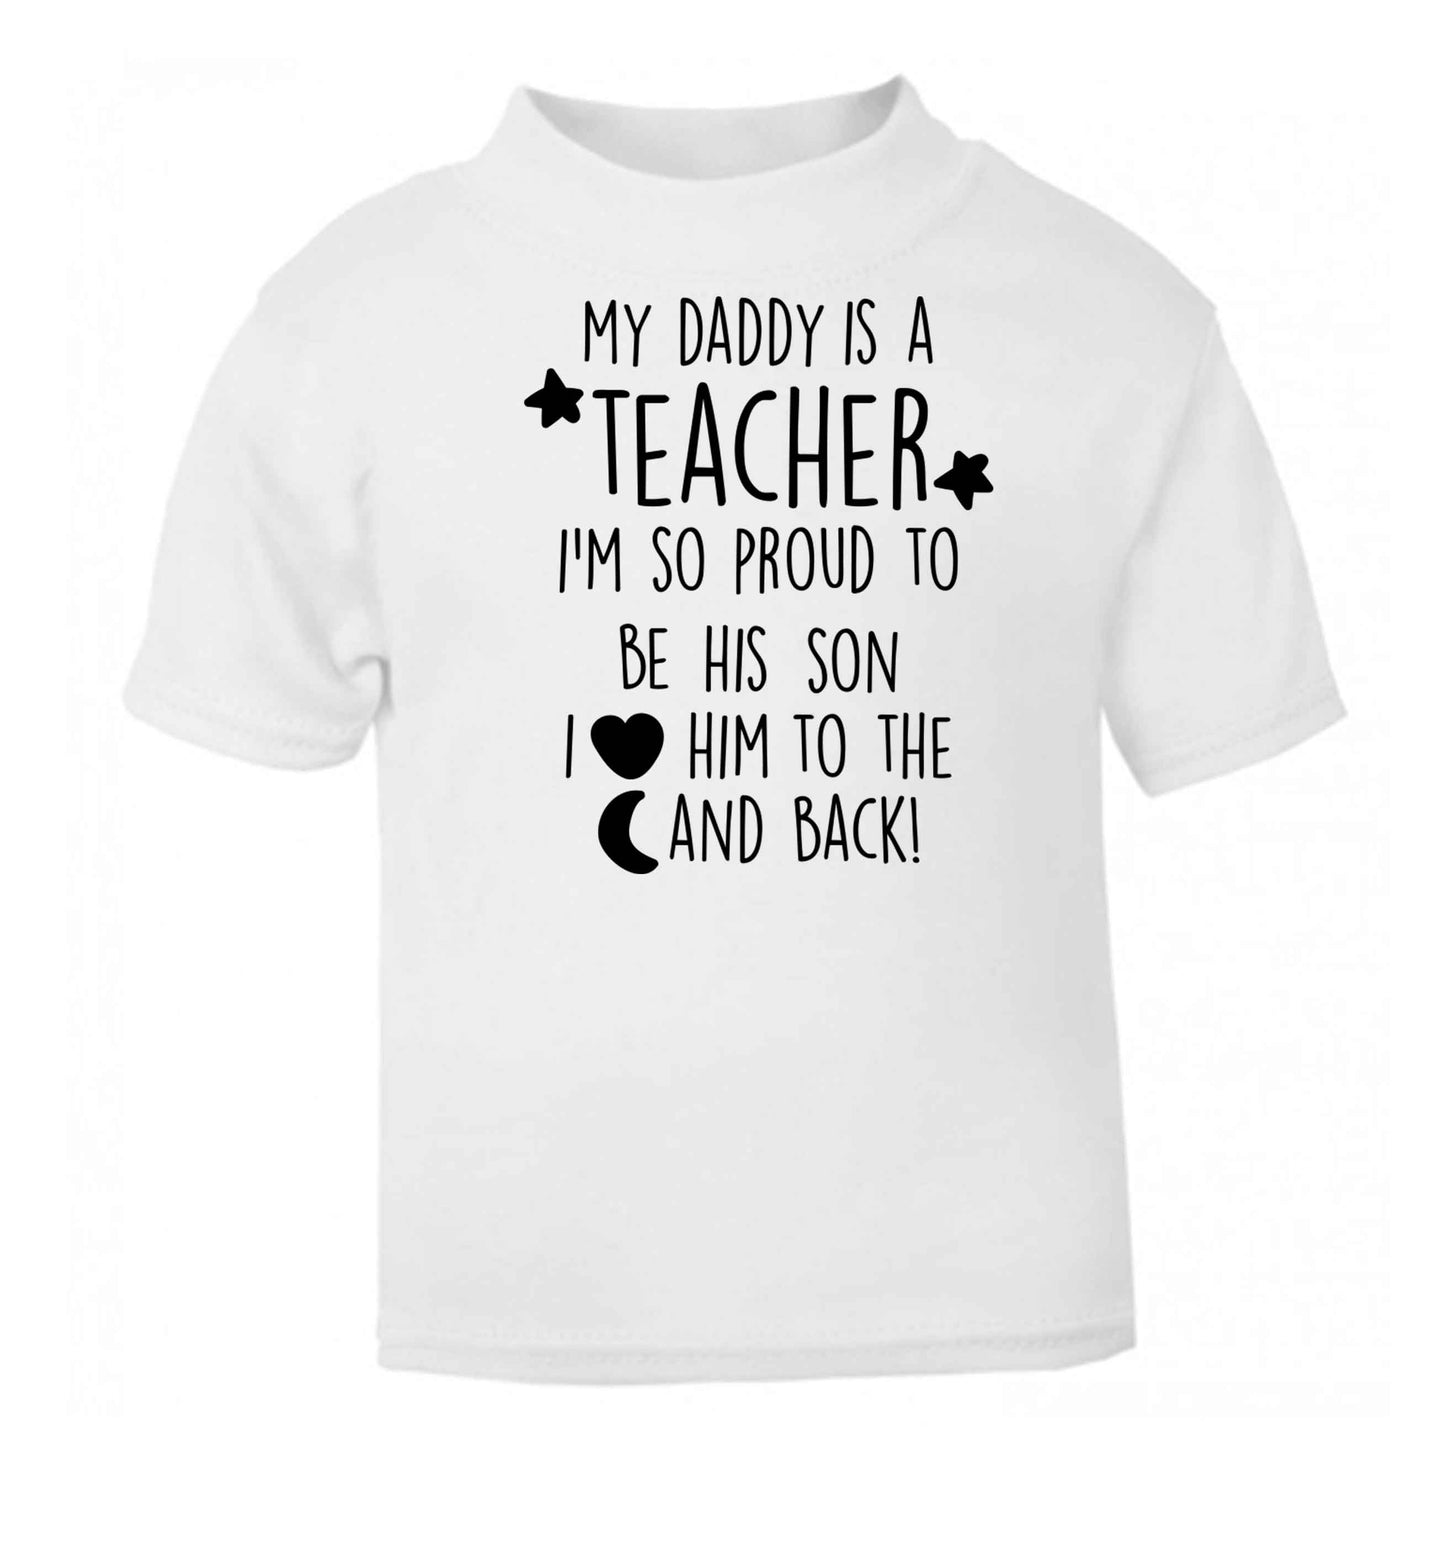 My daddy is a teacher I'm so proud to be his son I love her to the moon and back white baby toddler Tshirt 2 Years